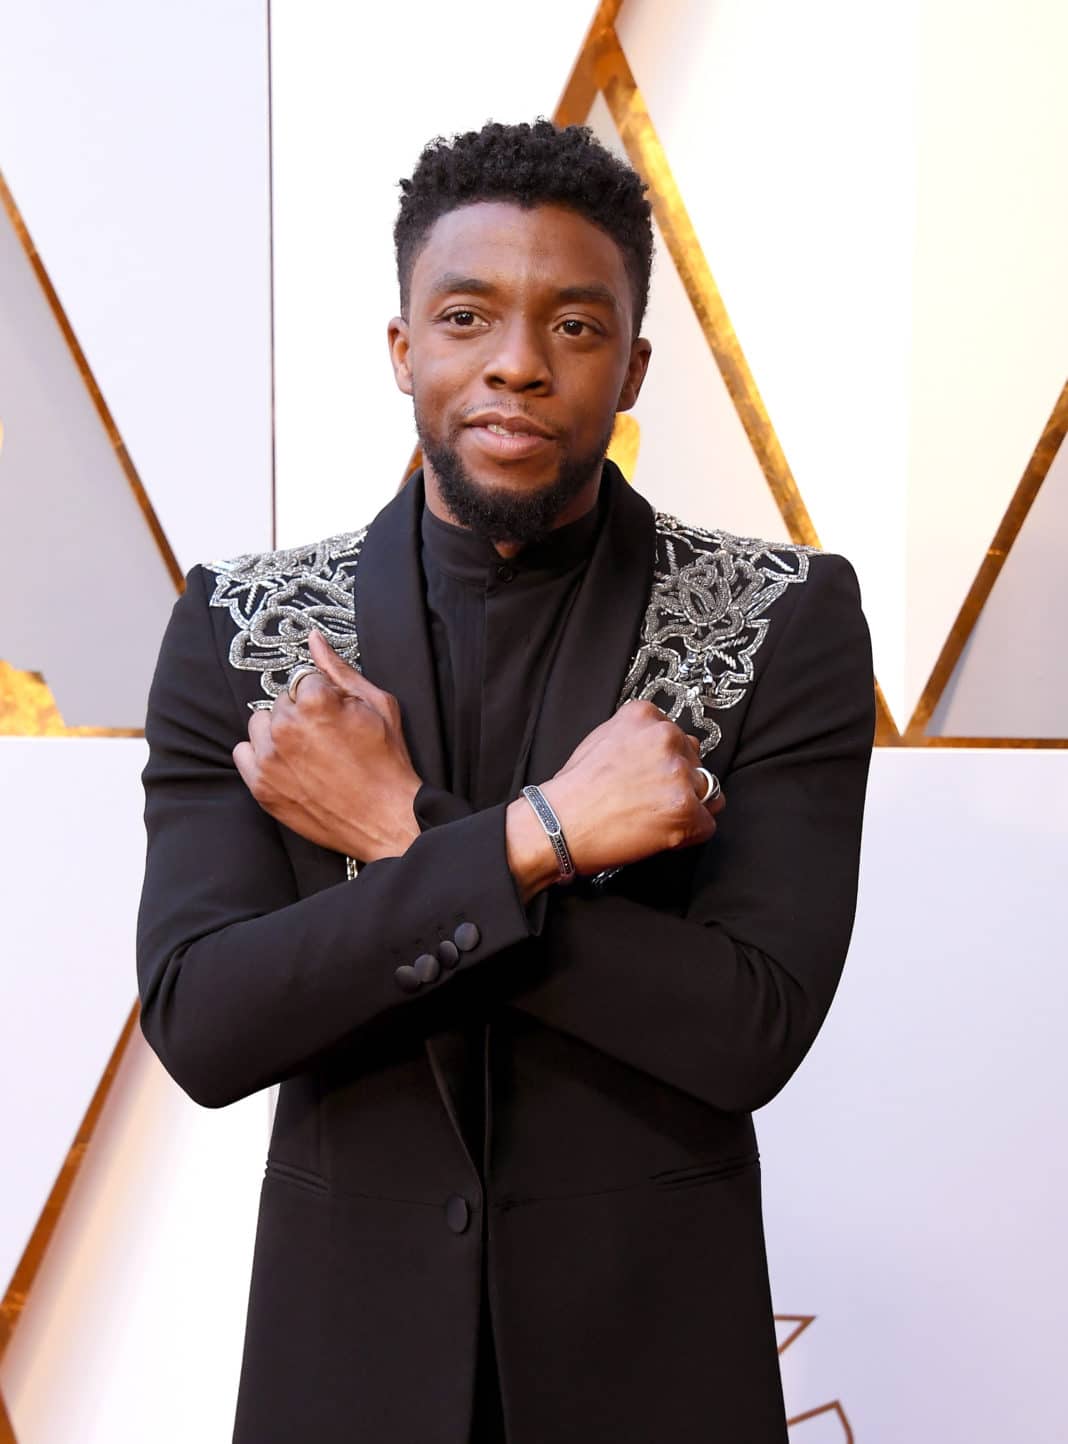 Chadwick Boseman To Be Laid To Rest in South Carolina